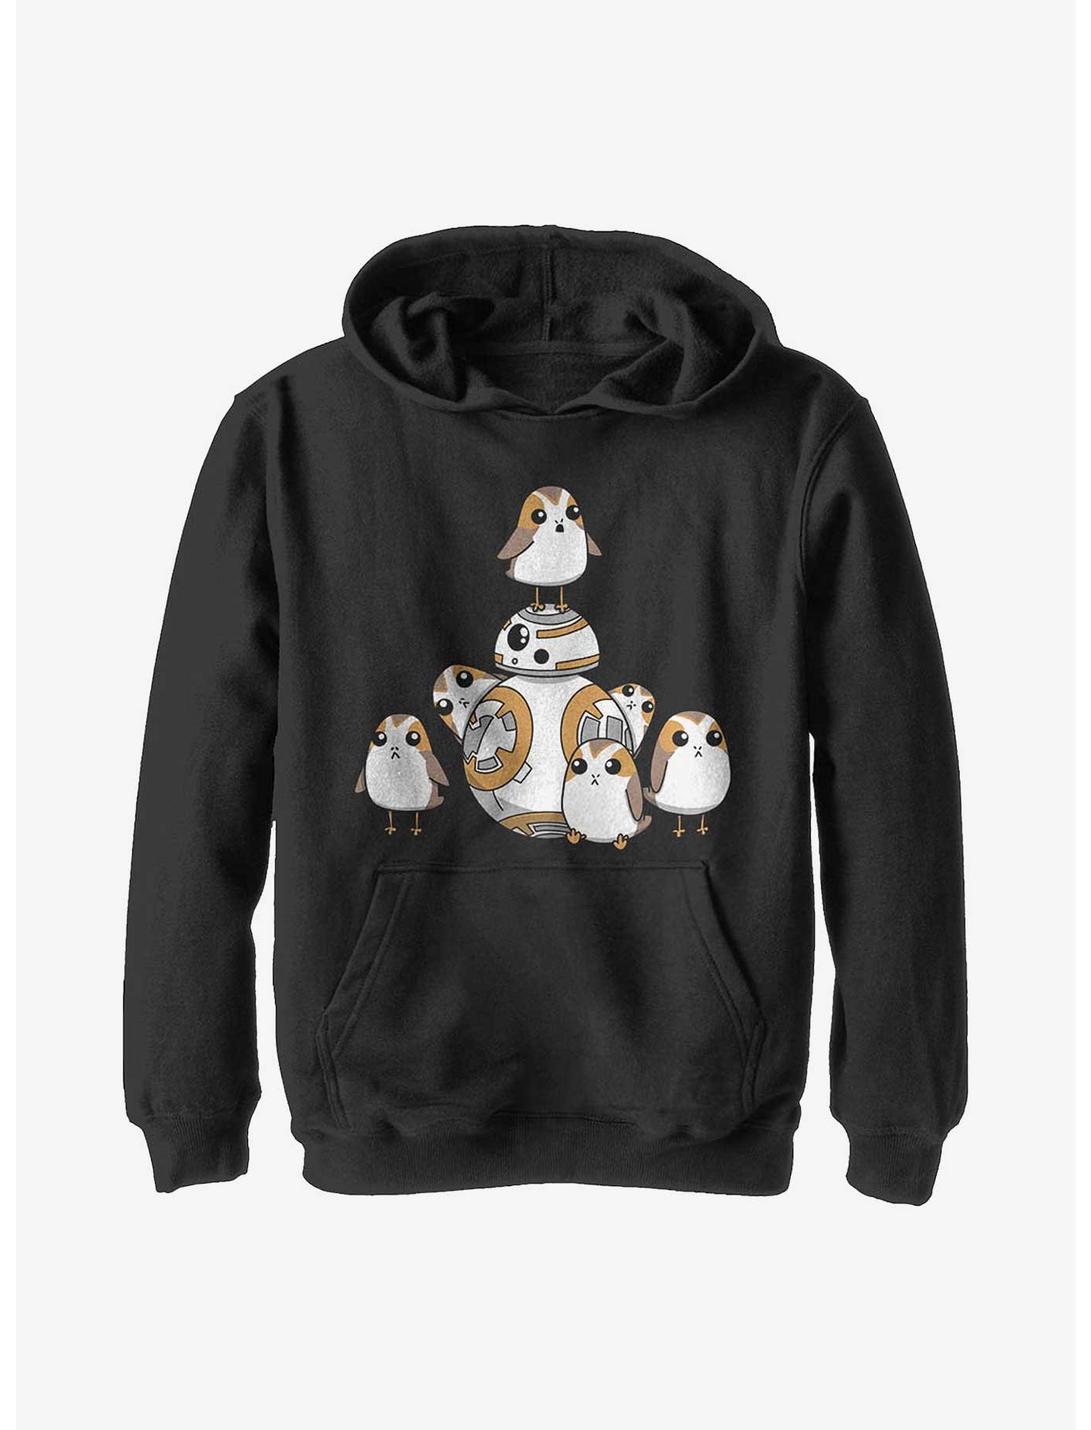 Star Wars Episode VIII: The Last Jedi BB-8 And Porgs Youth Hoodie, BLACK, hi-res